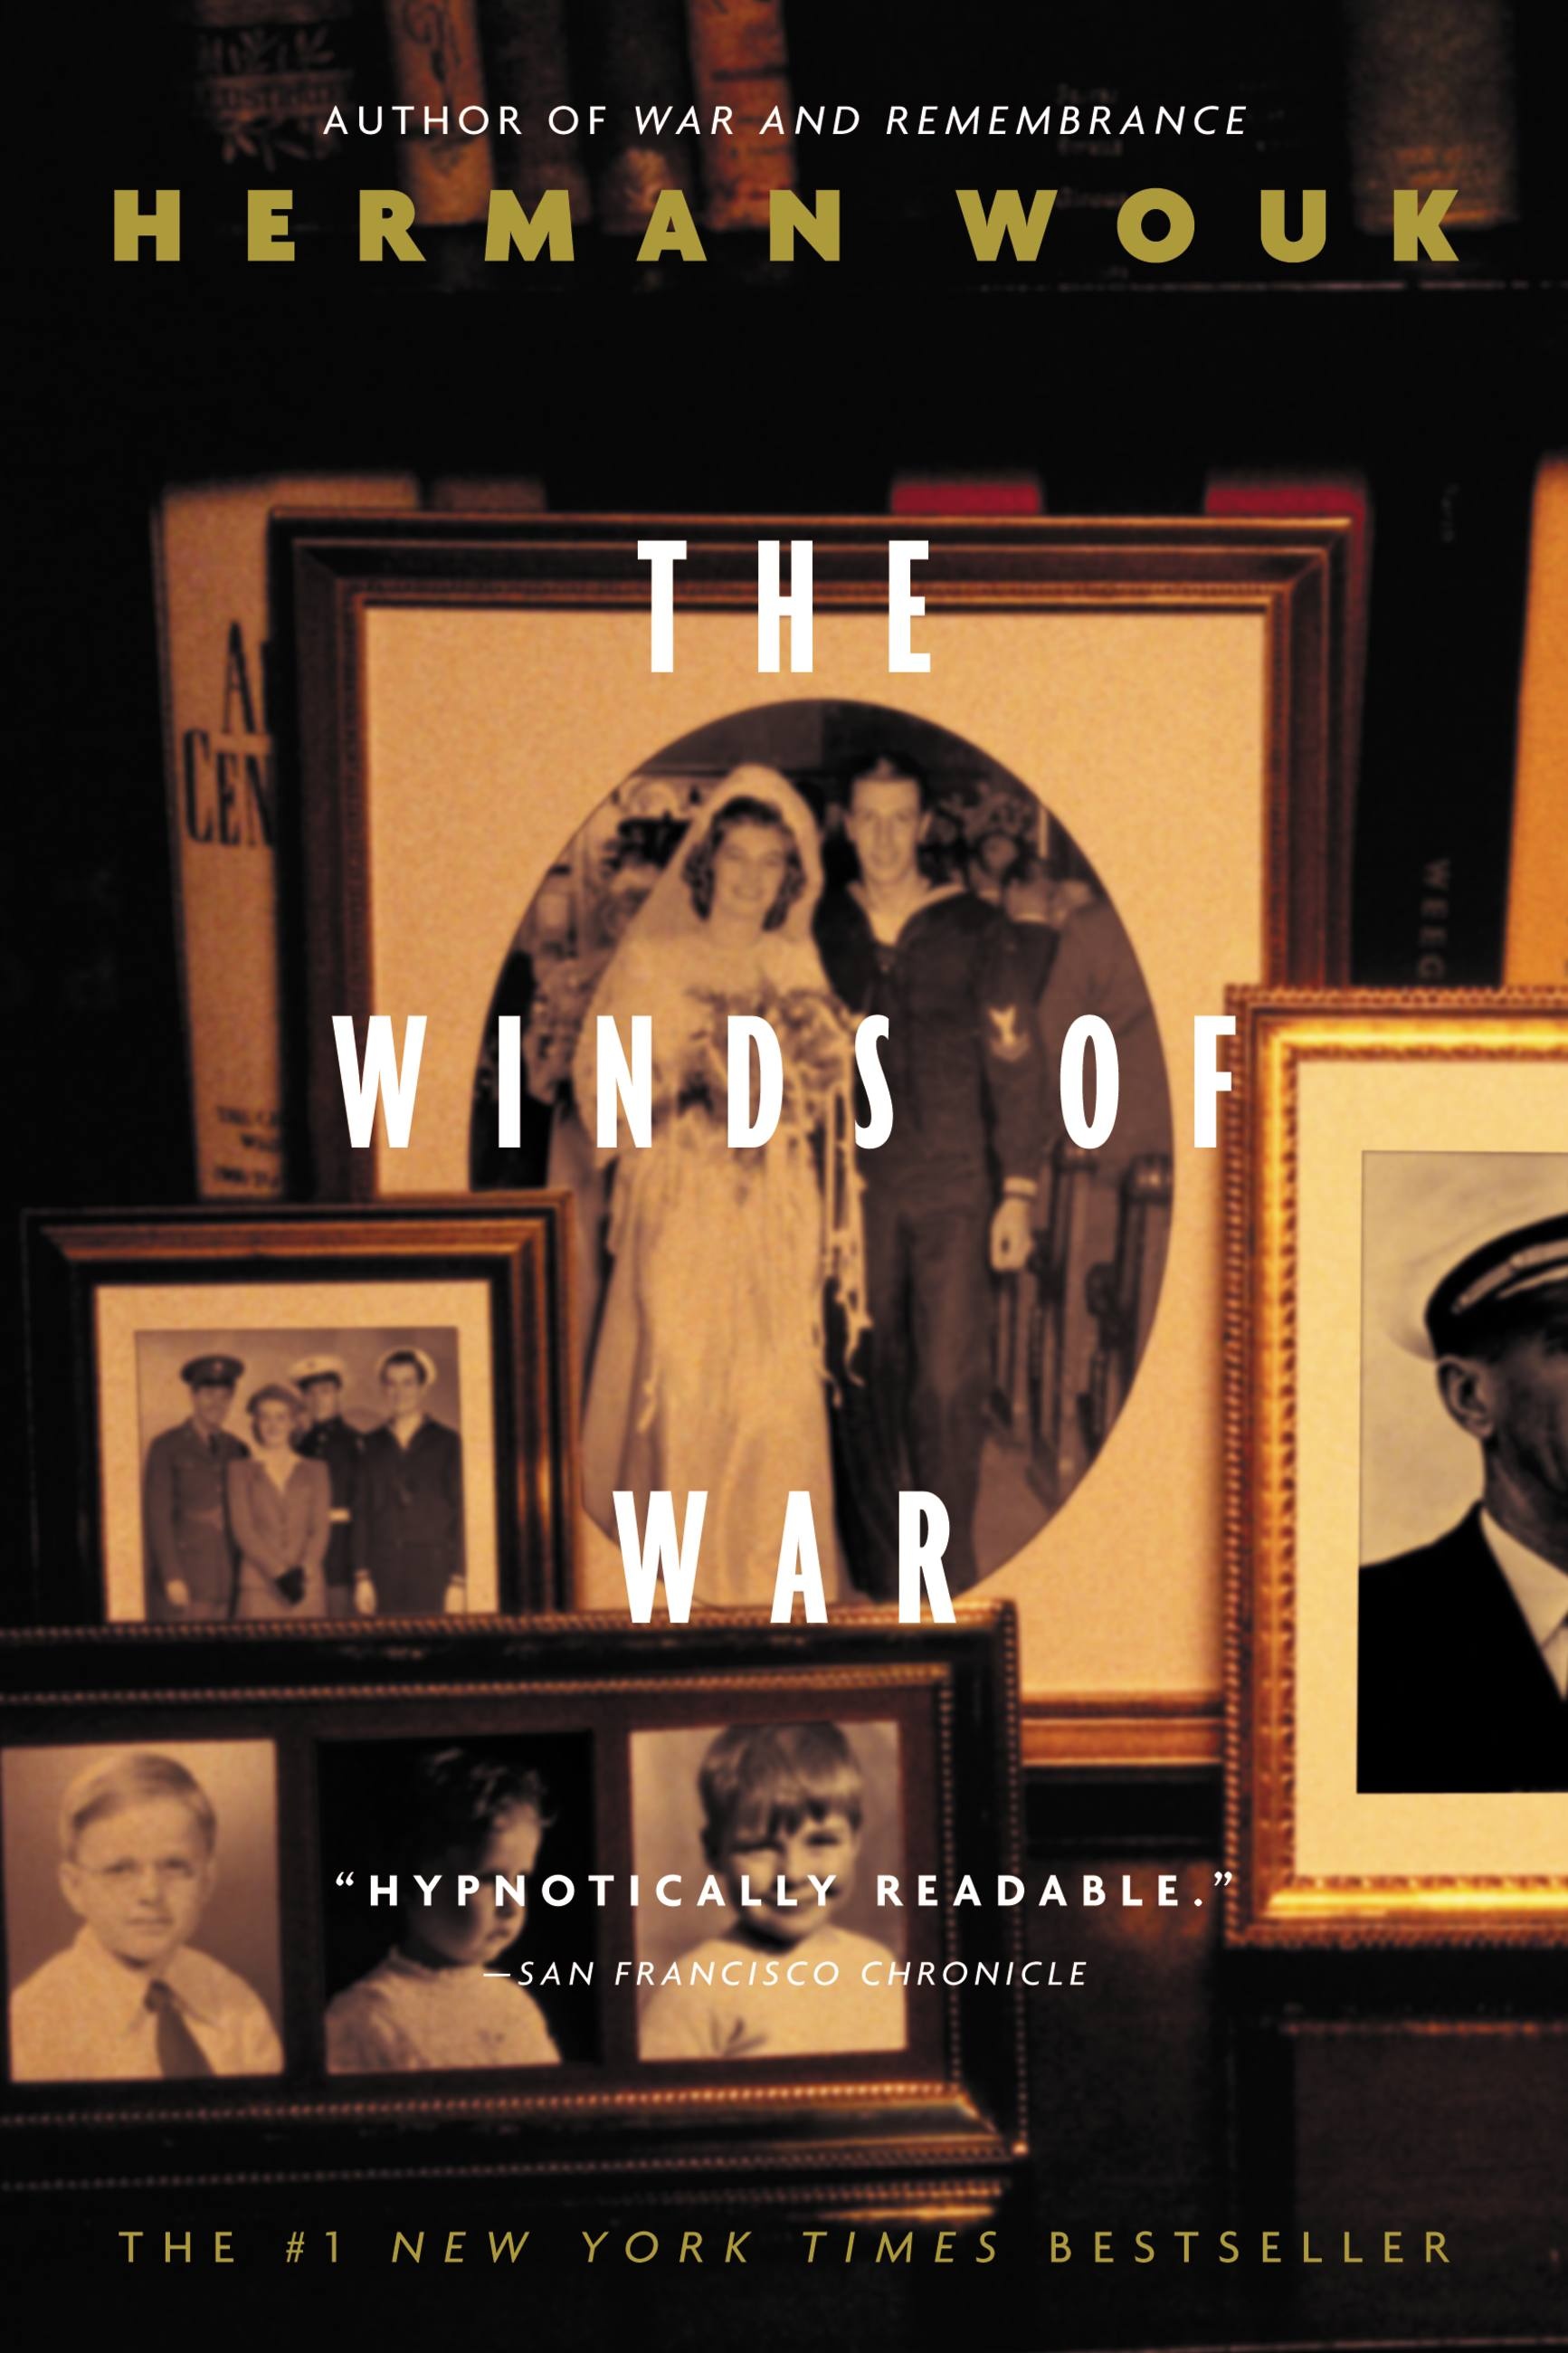 the winds of war wouk